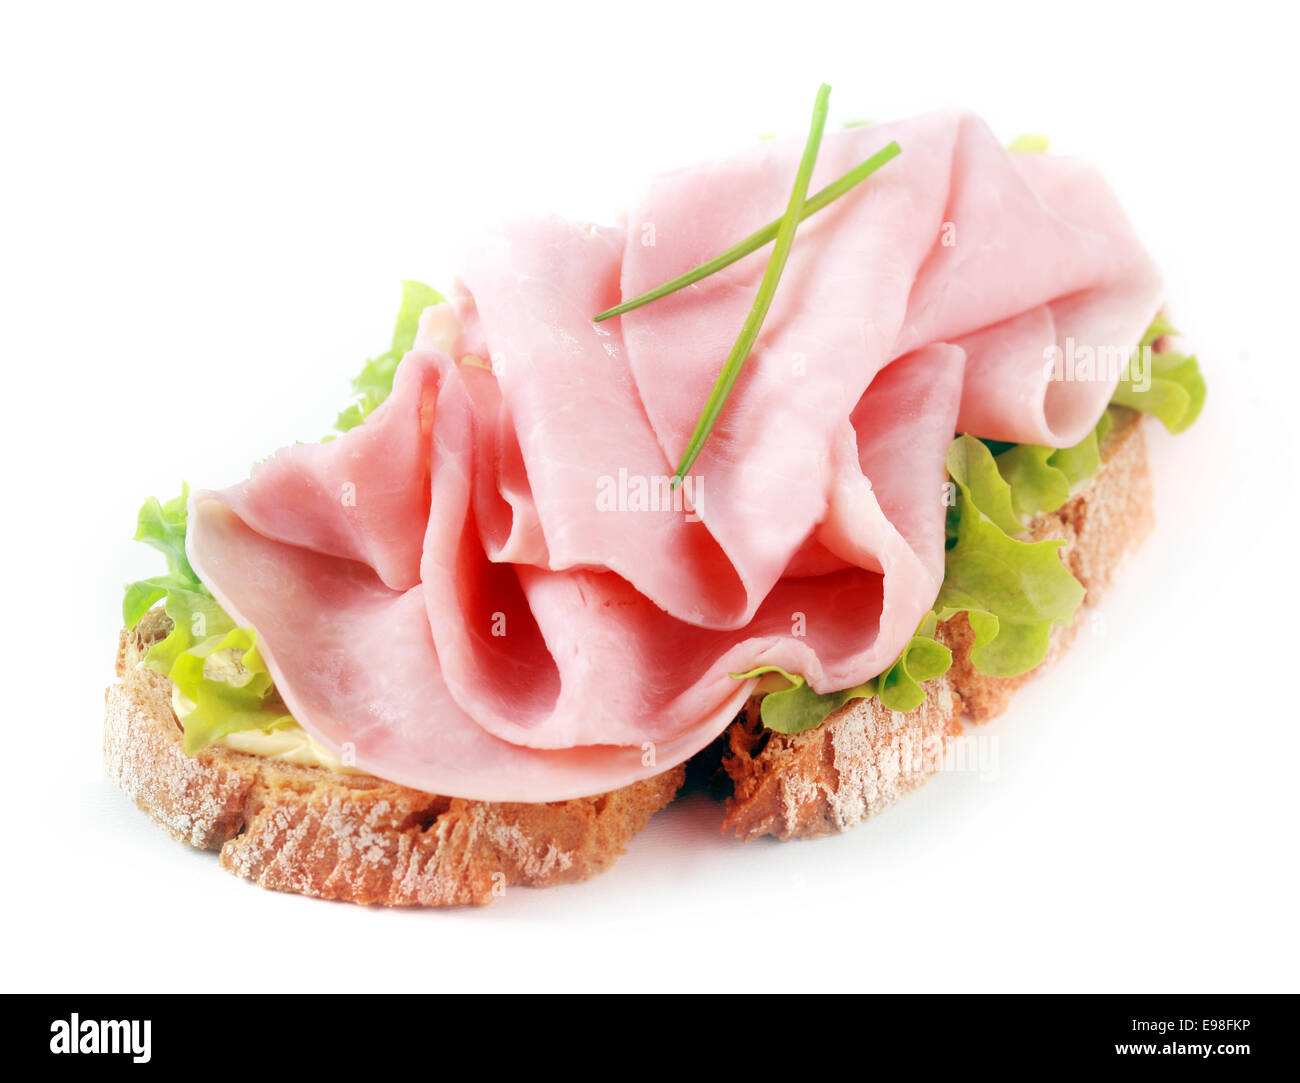 Open ham sandwich on a crusty slice of rye bread with fresh chives and lettuce over a white background Stock Photo